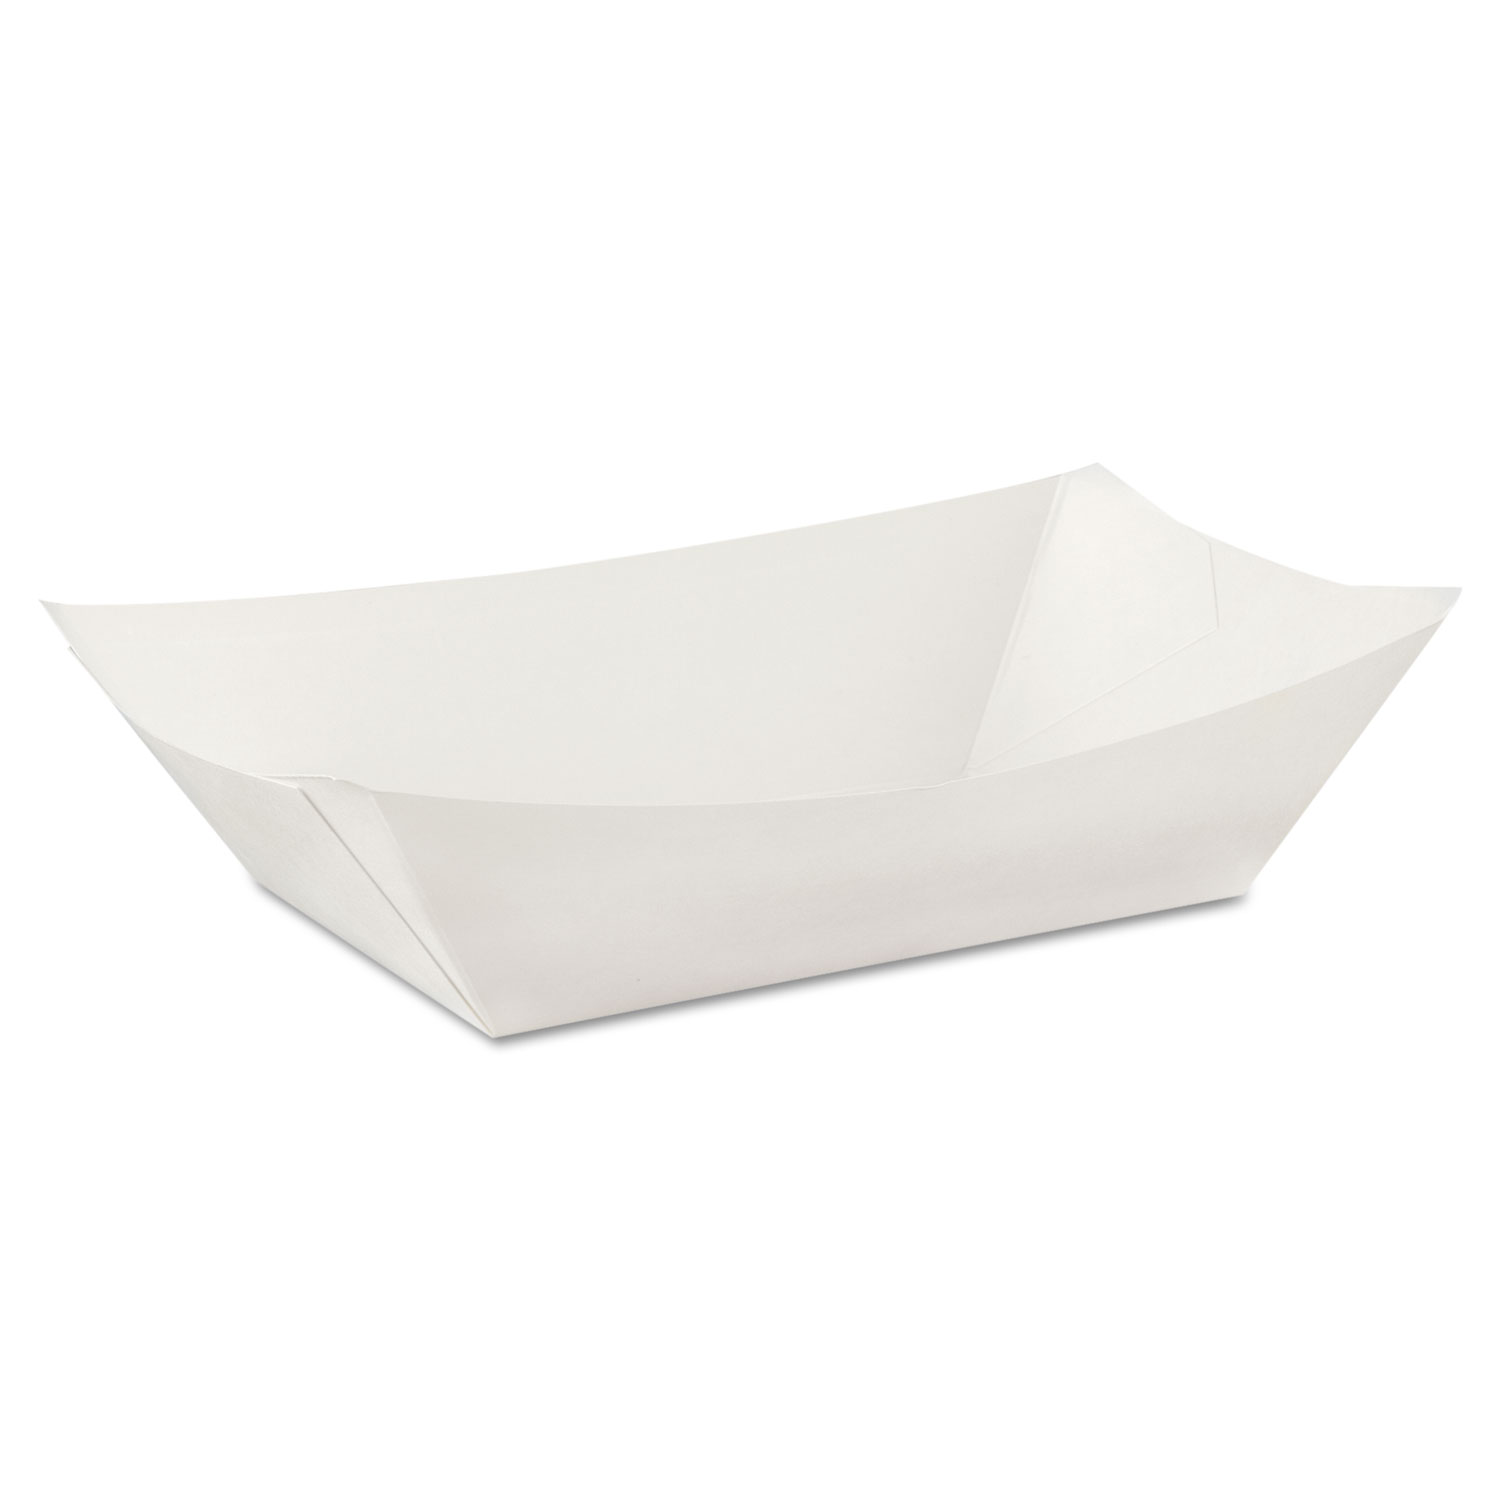  Dixie KL300W8 Kant Leek Polycoated Paper Food Tray, 3 Pound, White, 250/Pack (DXEKL300W8) 